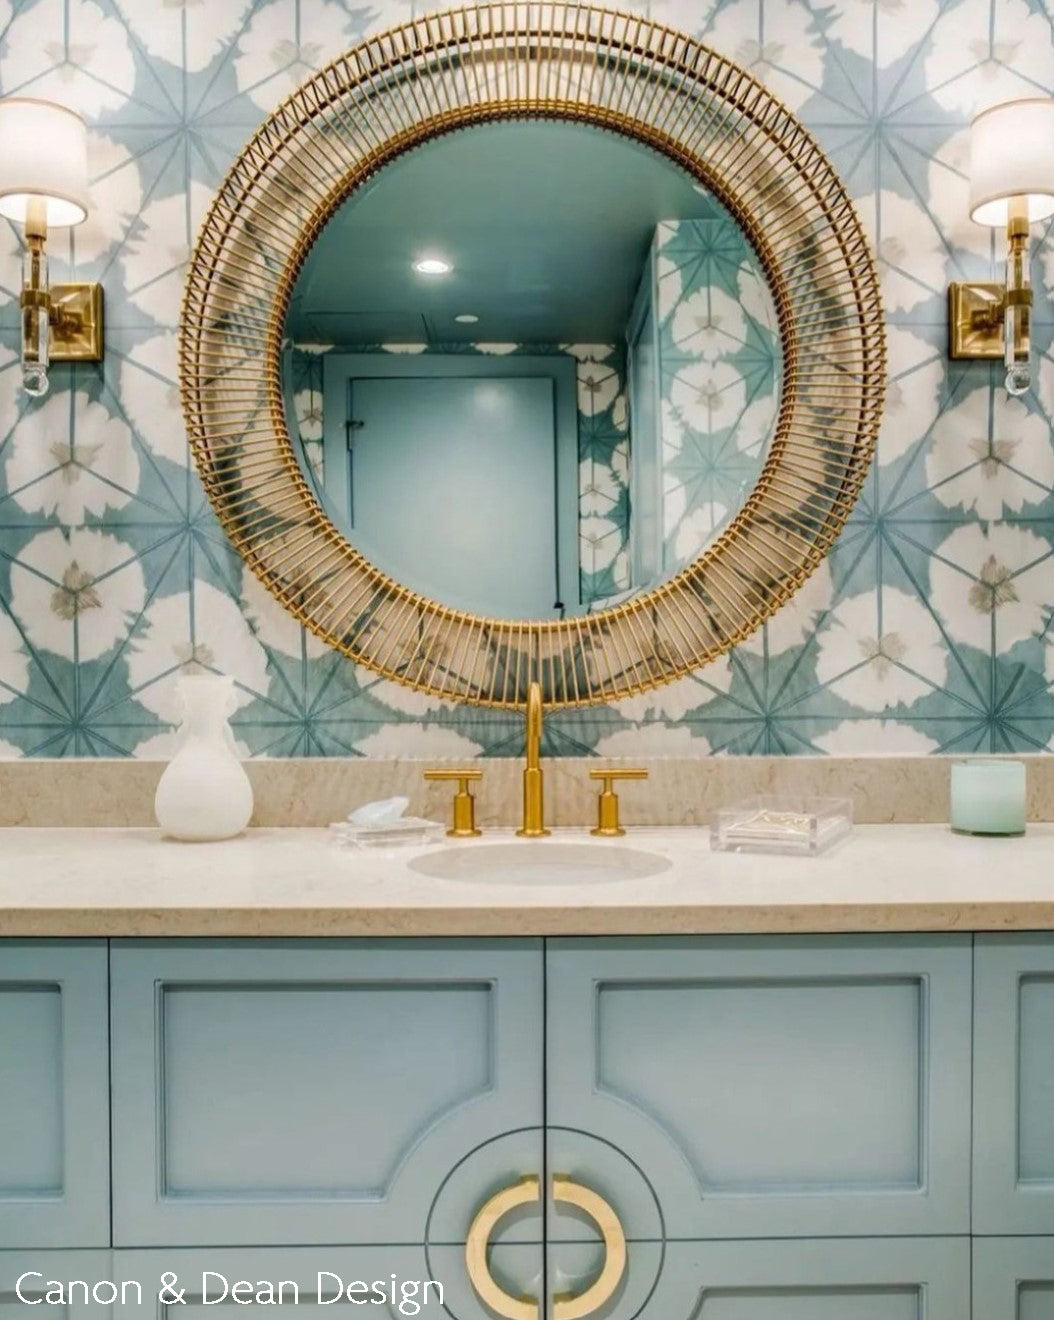 Crystal sconces with antique brass trim next to gold mirror in bathroom.